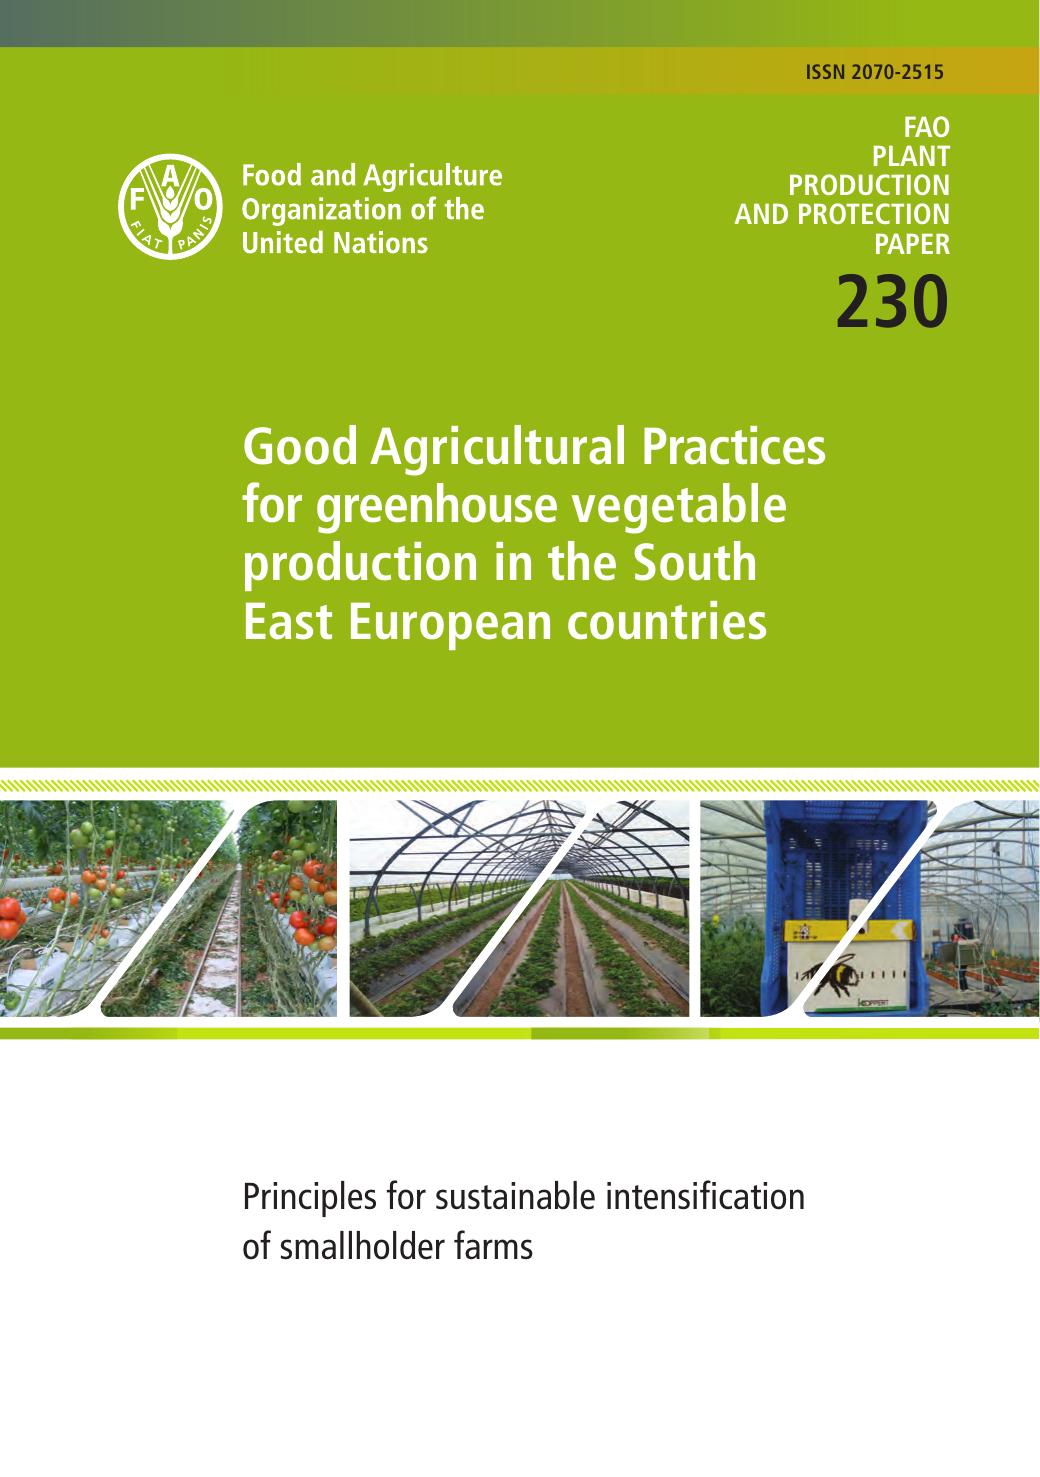 GOOD AGRICULTURAL PRACTICES FOR GREENHOUSE VEGETABLE PRODUCTION IN THE SOUTH EAST EUROPEAN EDITORS WILFRIED BAUDOIN, REMI NONO-WOMDIM, NEBAMBI LUTALADIO, ALISON HODDER